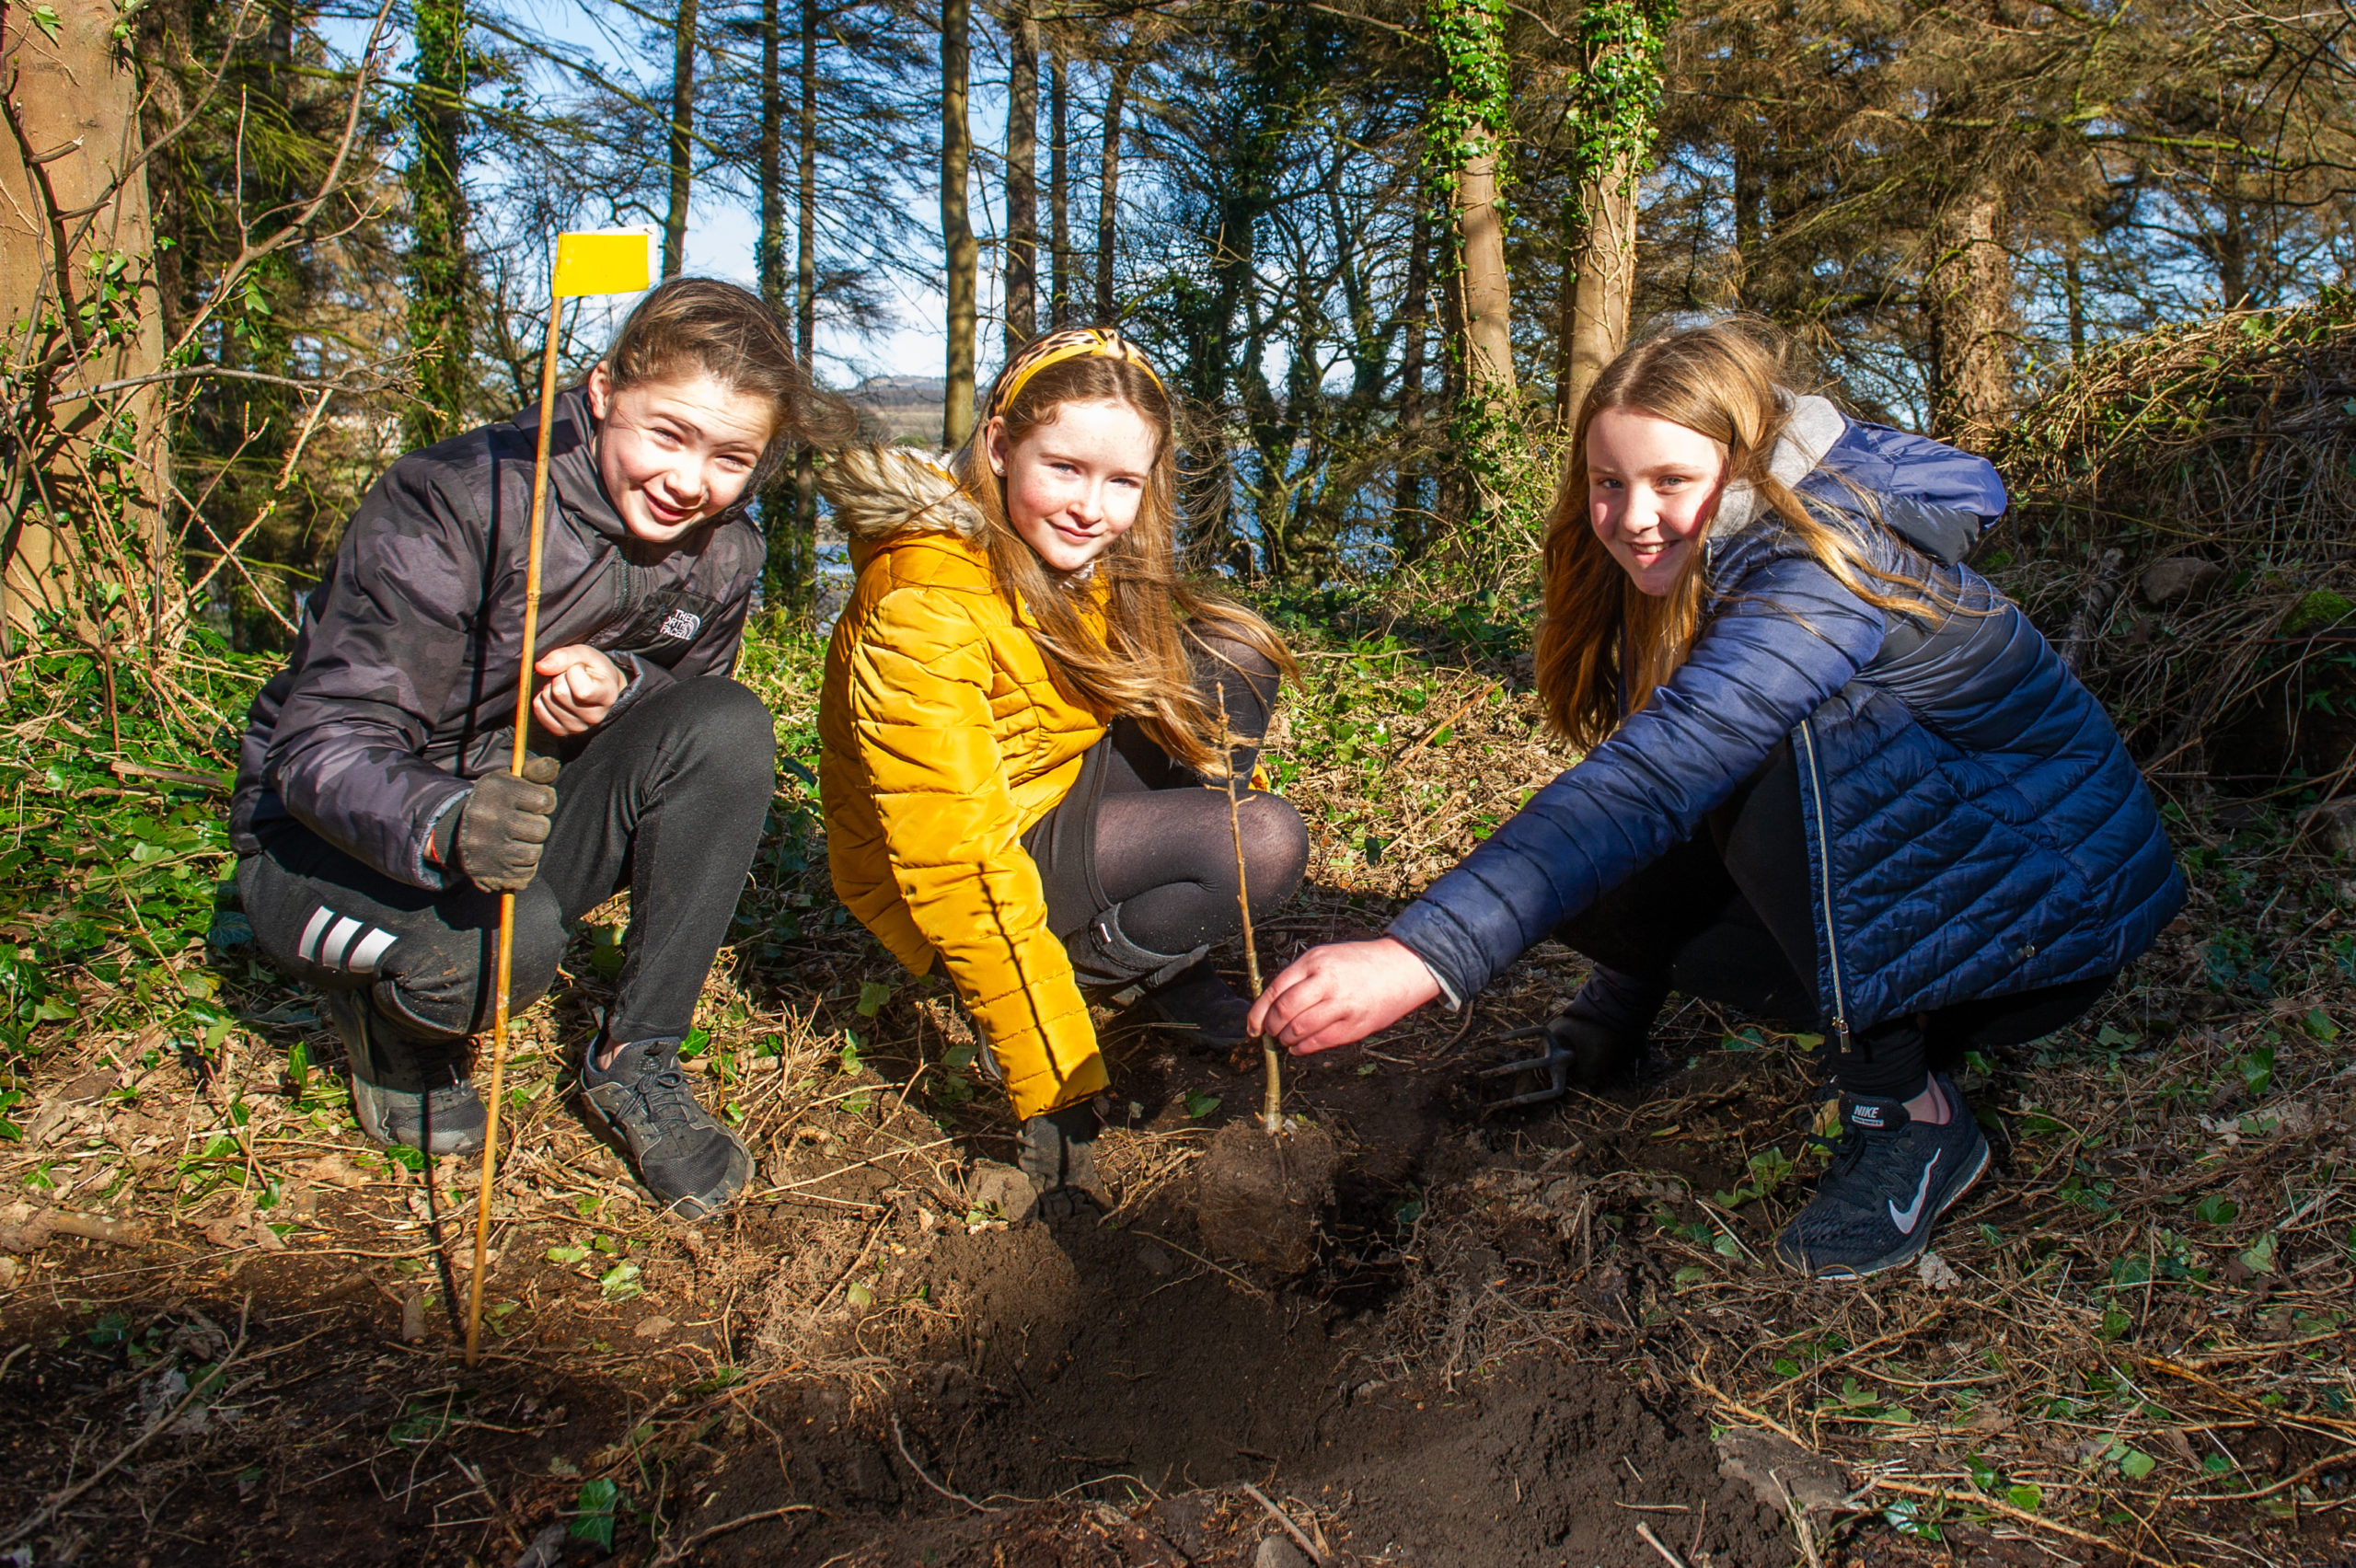 Donibristle PS pupils Abbie Duff (12), Holly Burns (11) and Erin Sinclair (11), planting new oak trees in ancient woodland in Dalgety Bay